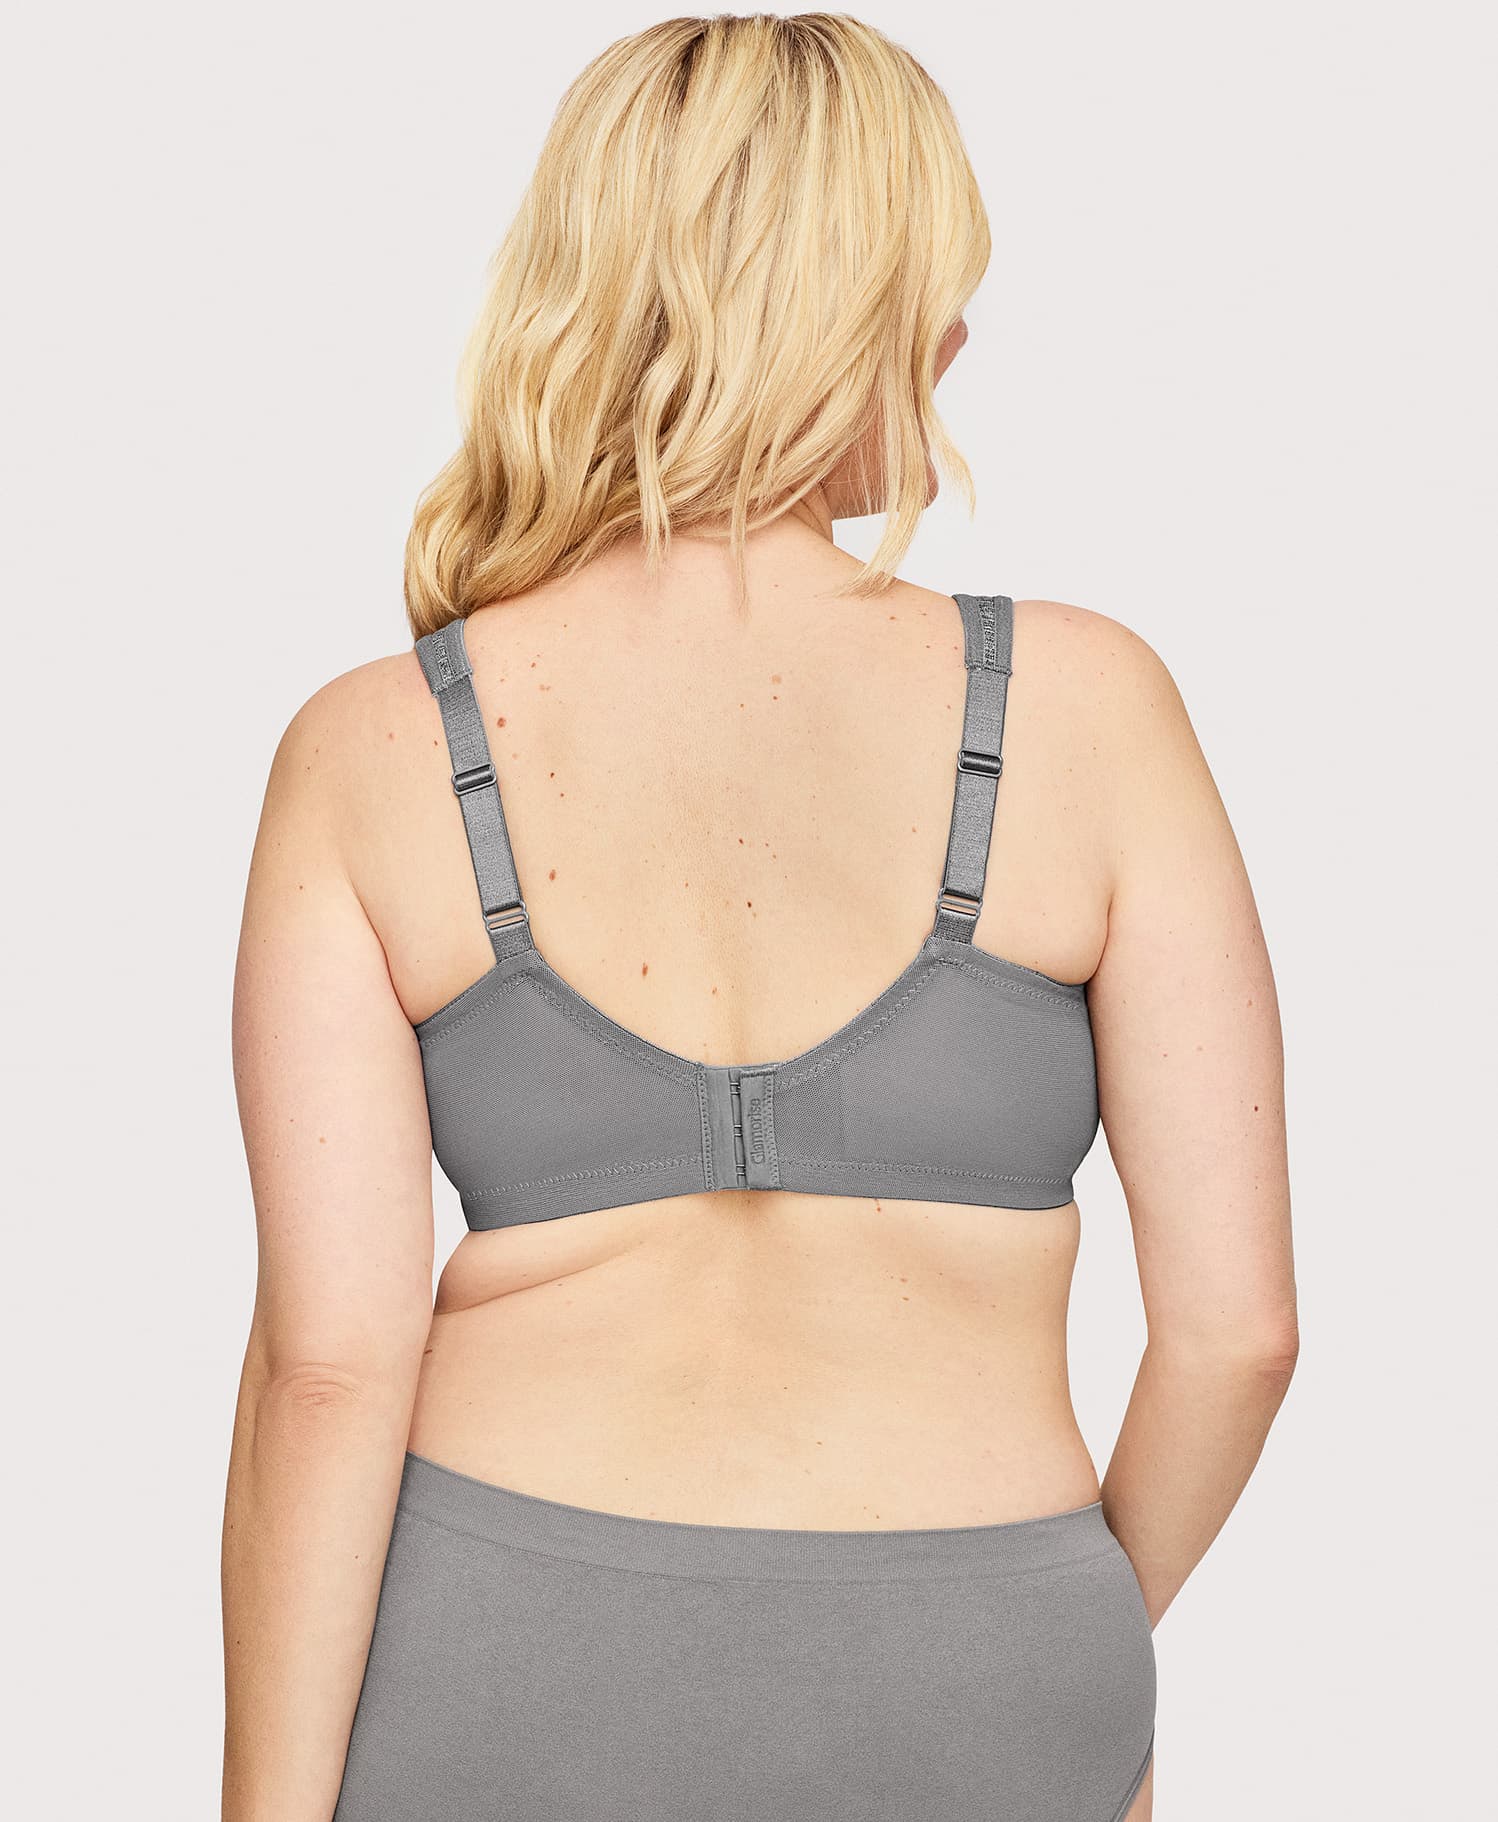 USED $57 Glamorise [ 42H US ] MagicLift Seamless Sports Bra in Cafe Nude  #5522